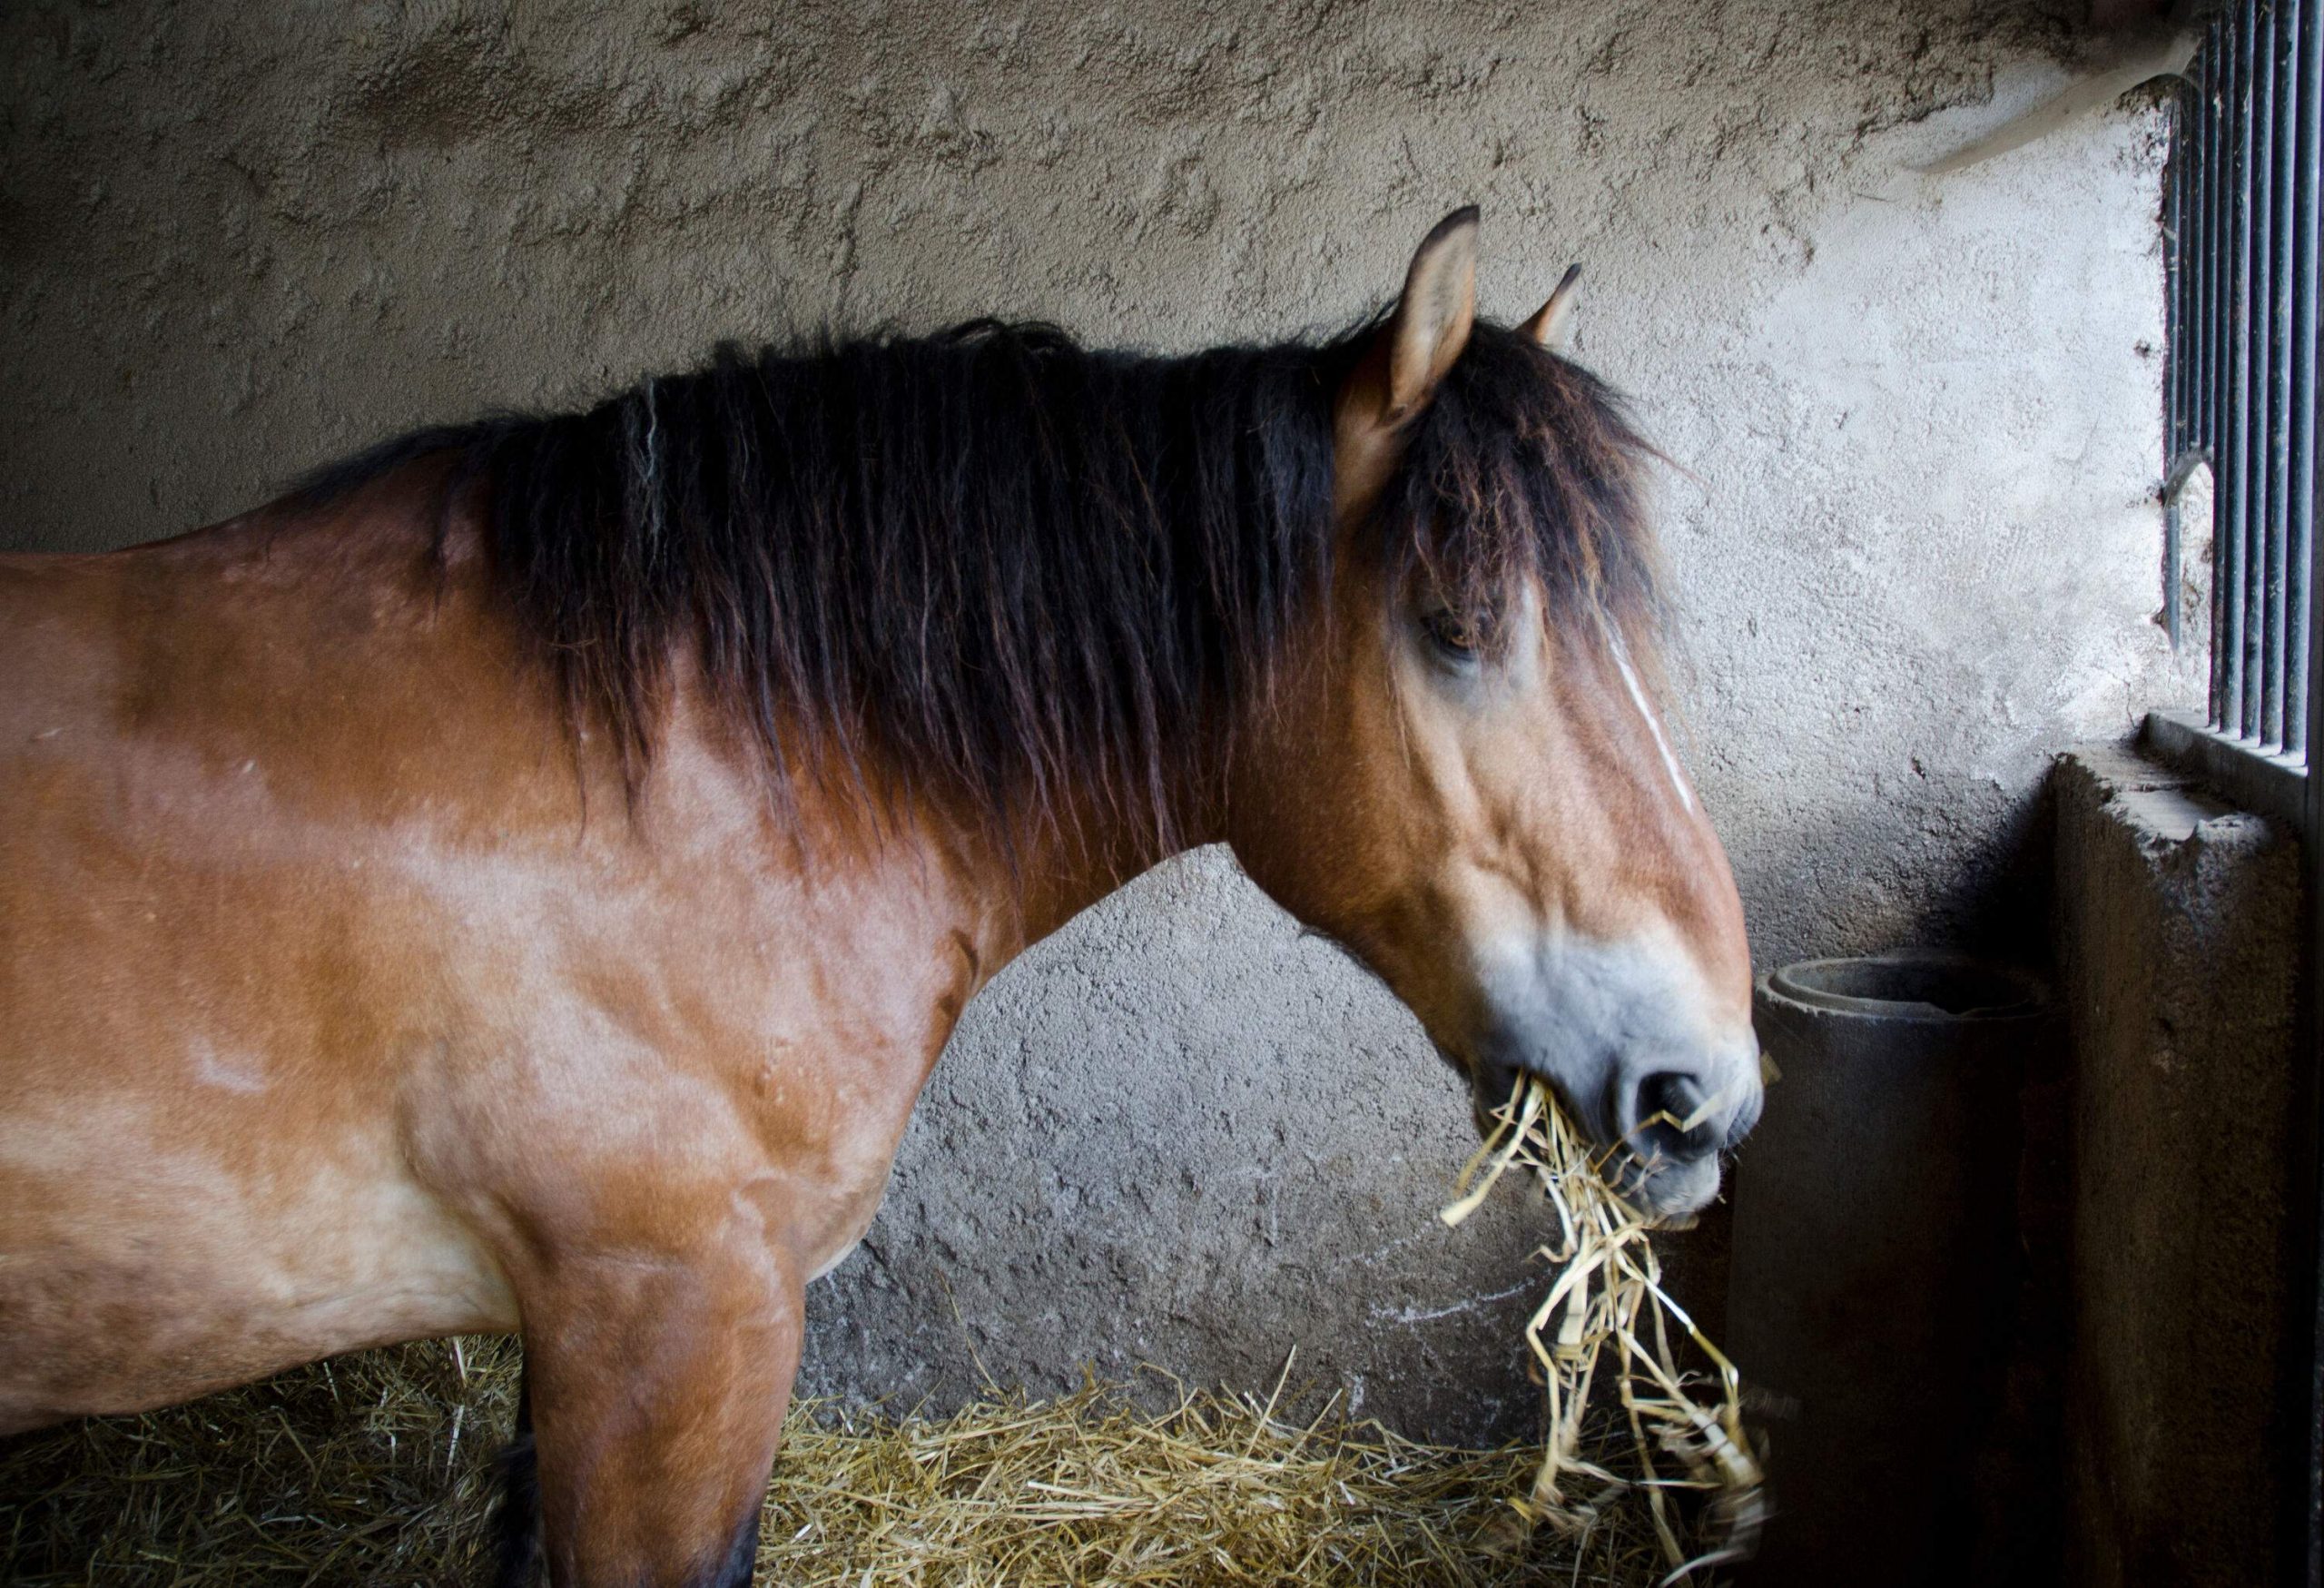 A brown horse with a long mane munches on hay within the barn.